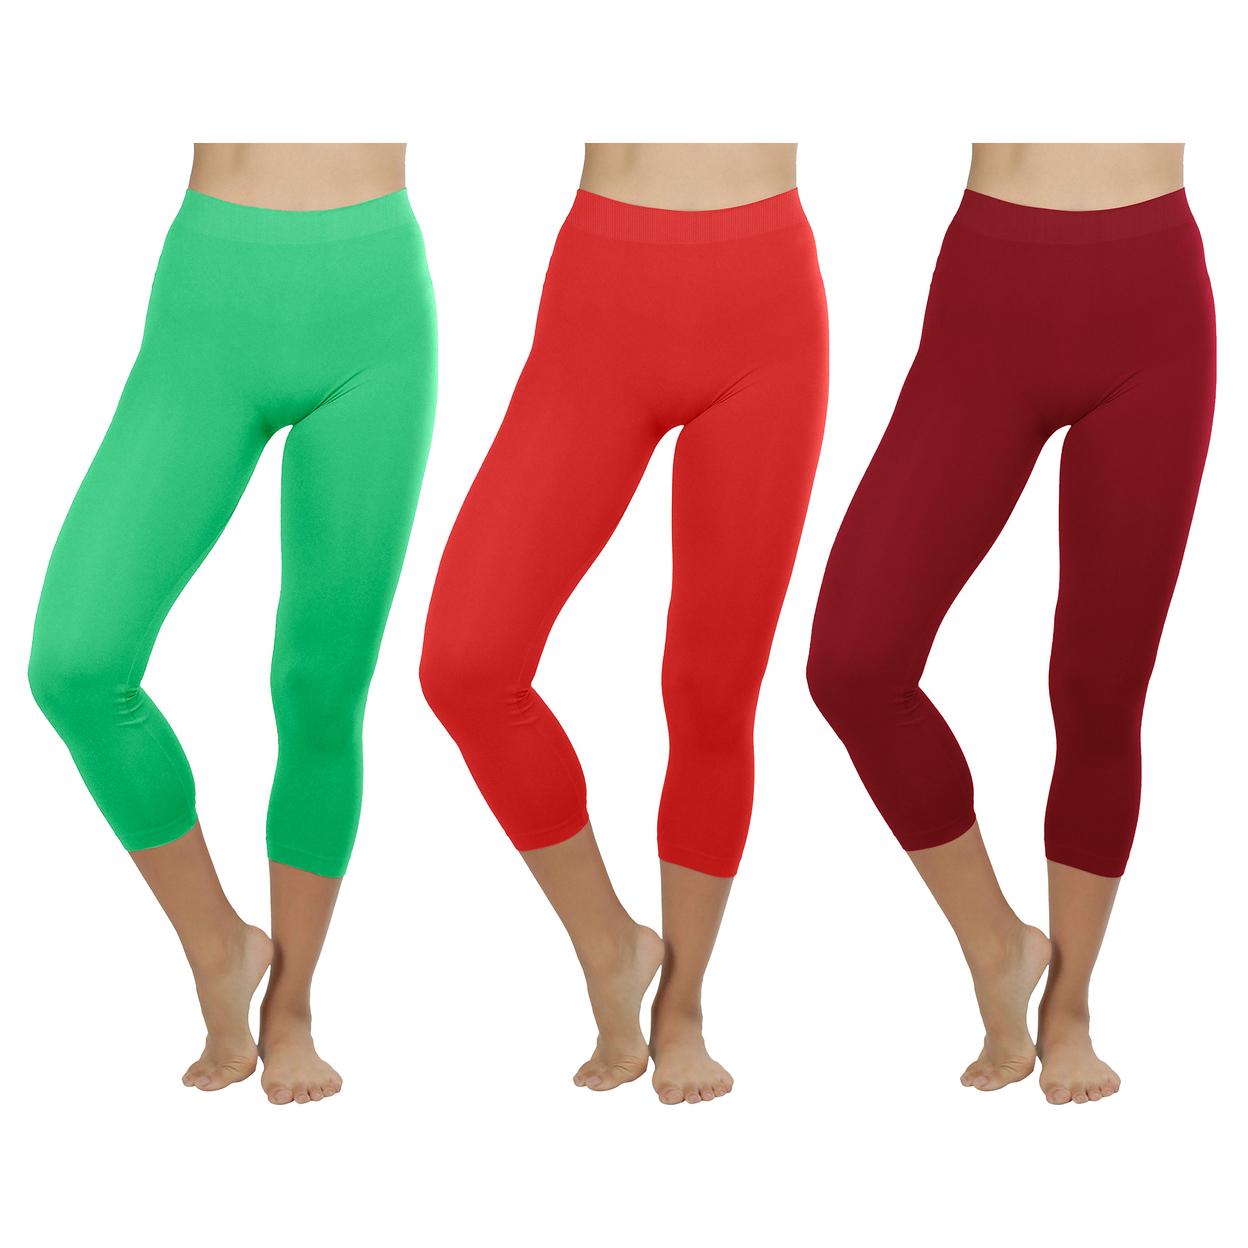 2-Pack: Women's Ultra-Soft High Waisted Smooth Stretch Active Yoga Capri Leggings - Green & Burgundy, X-small